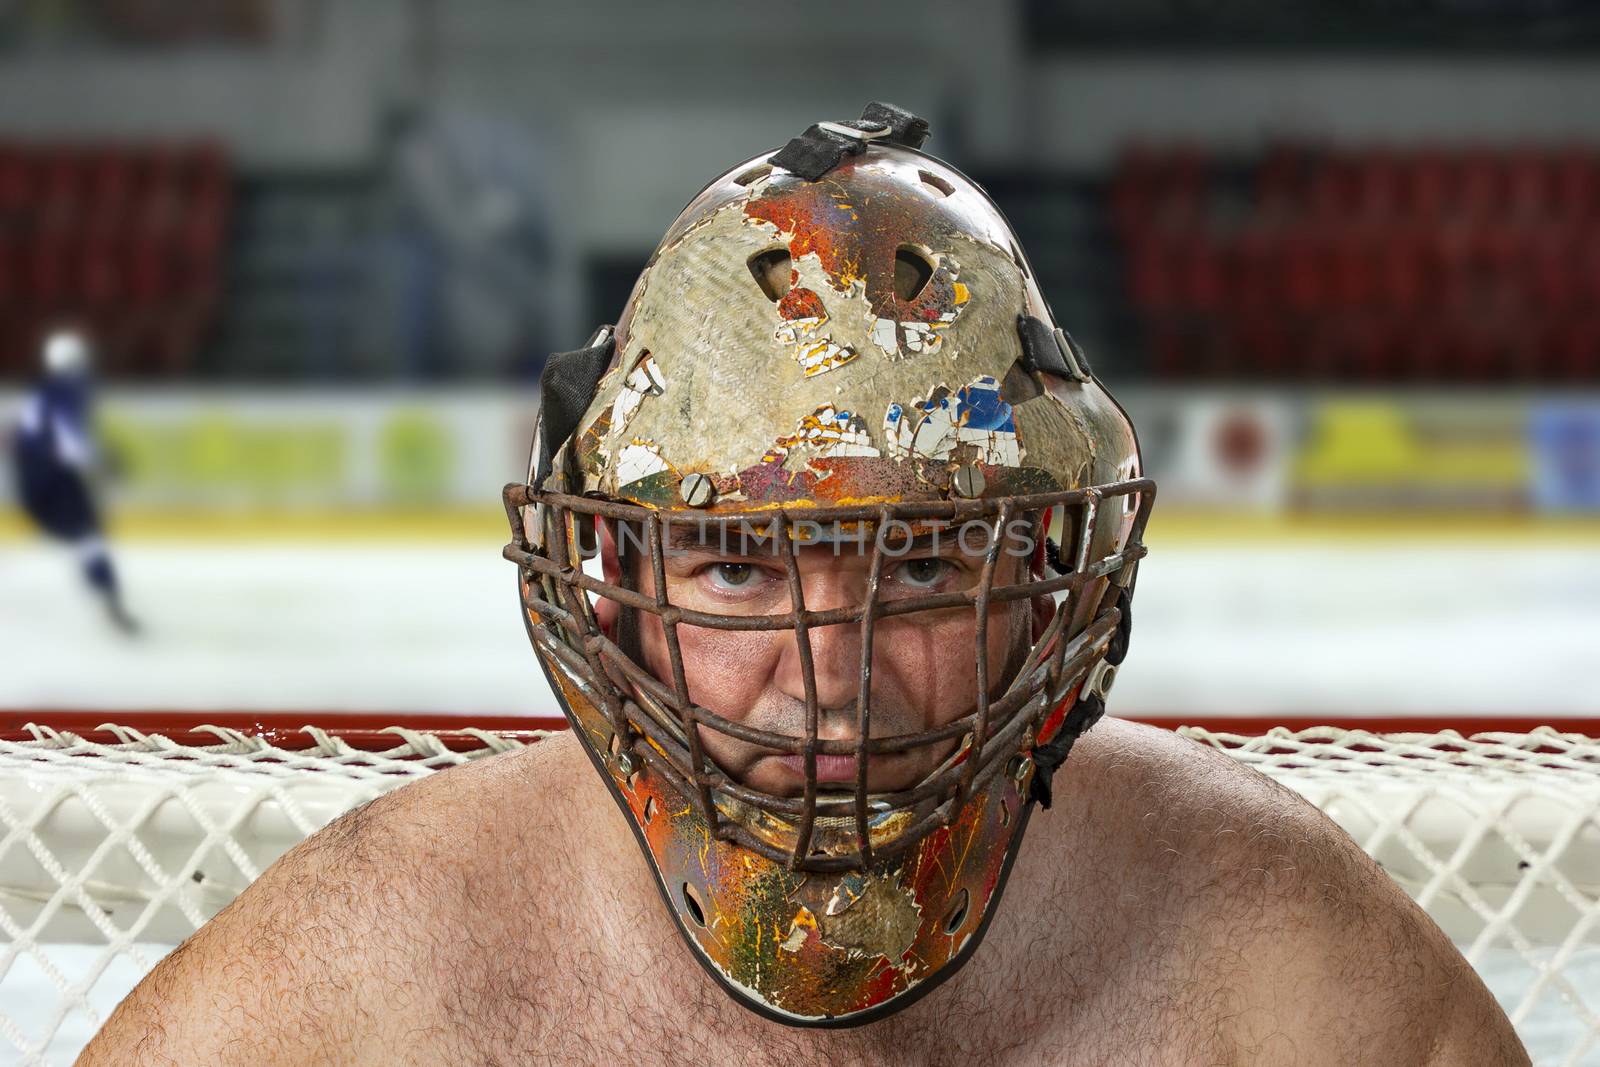 Hockey goalie in the mask. Goalkeeper in an old hockey mask by 977_ReX_977